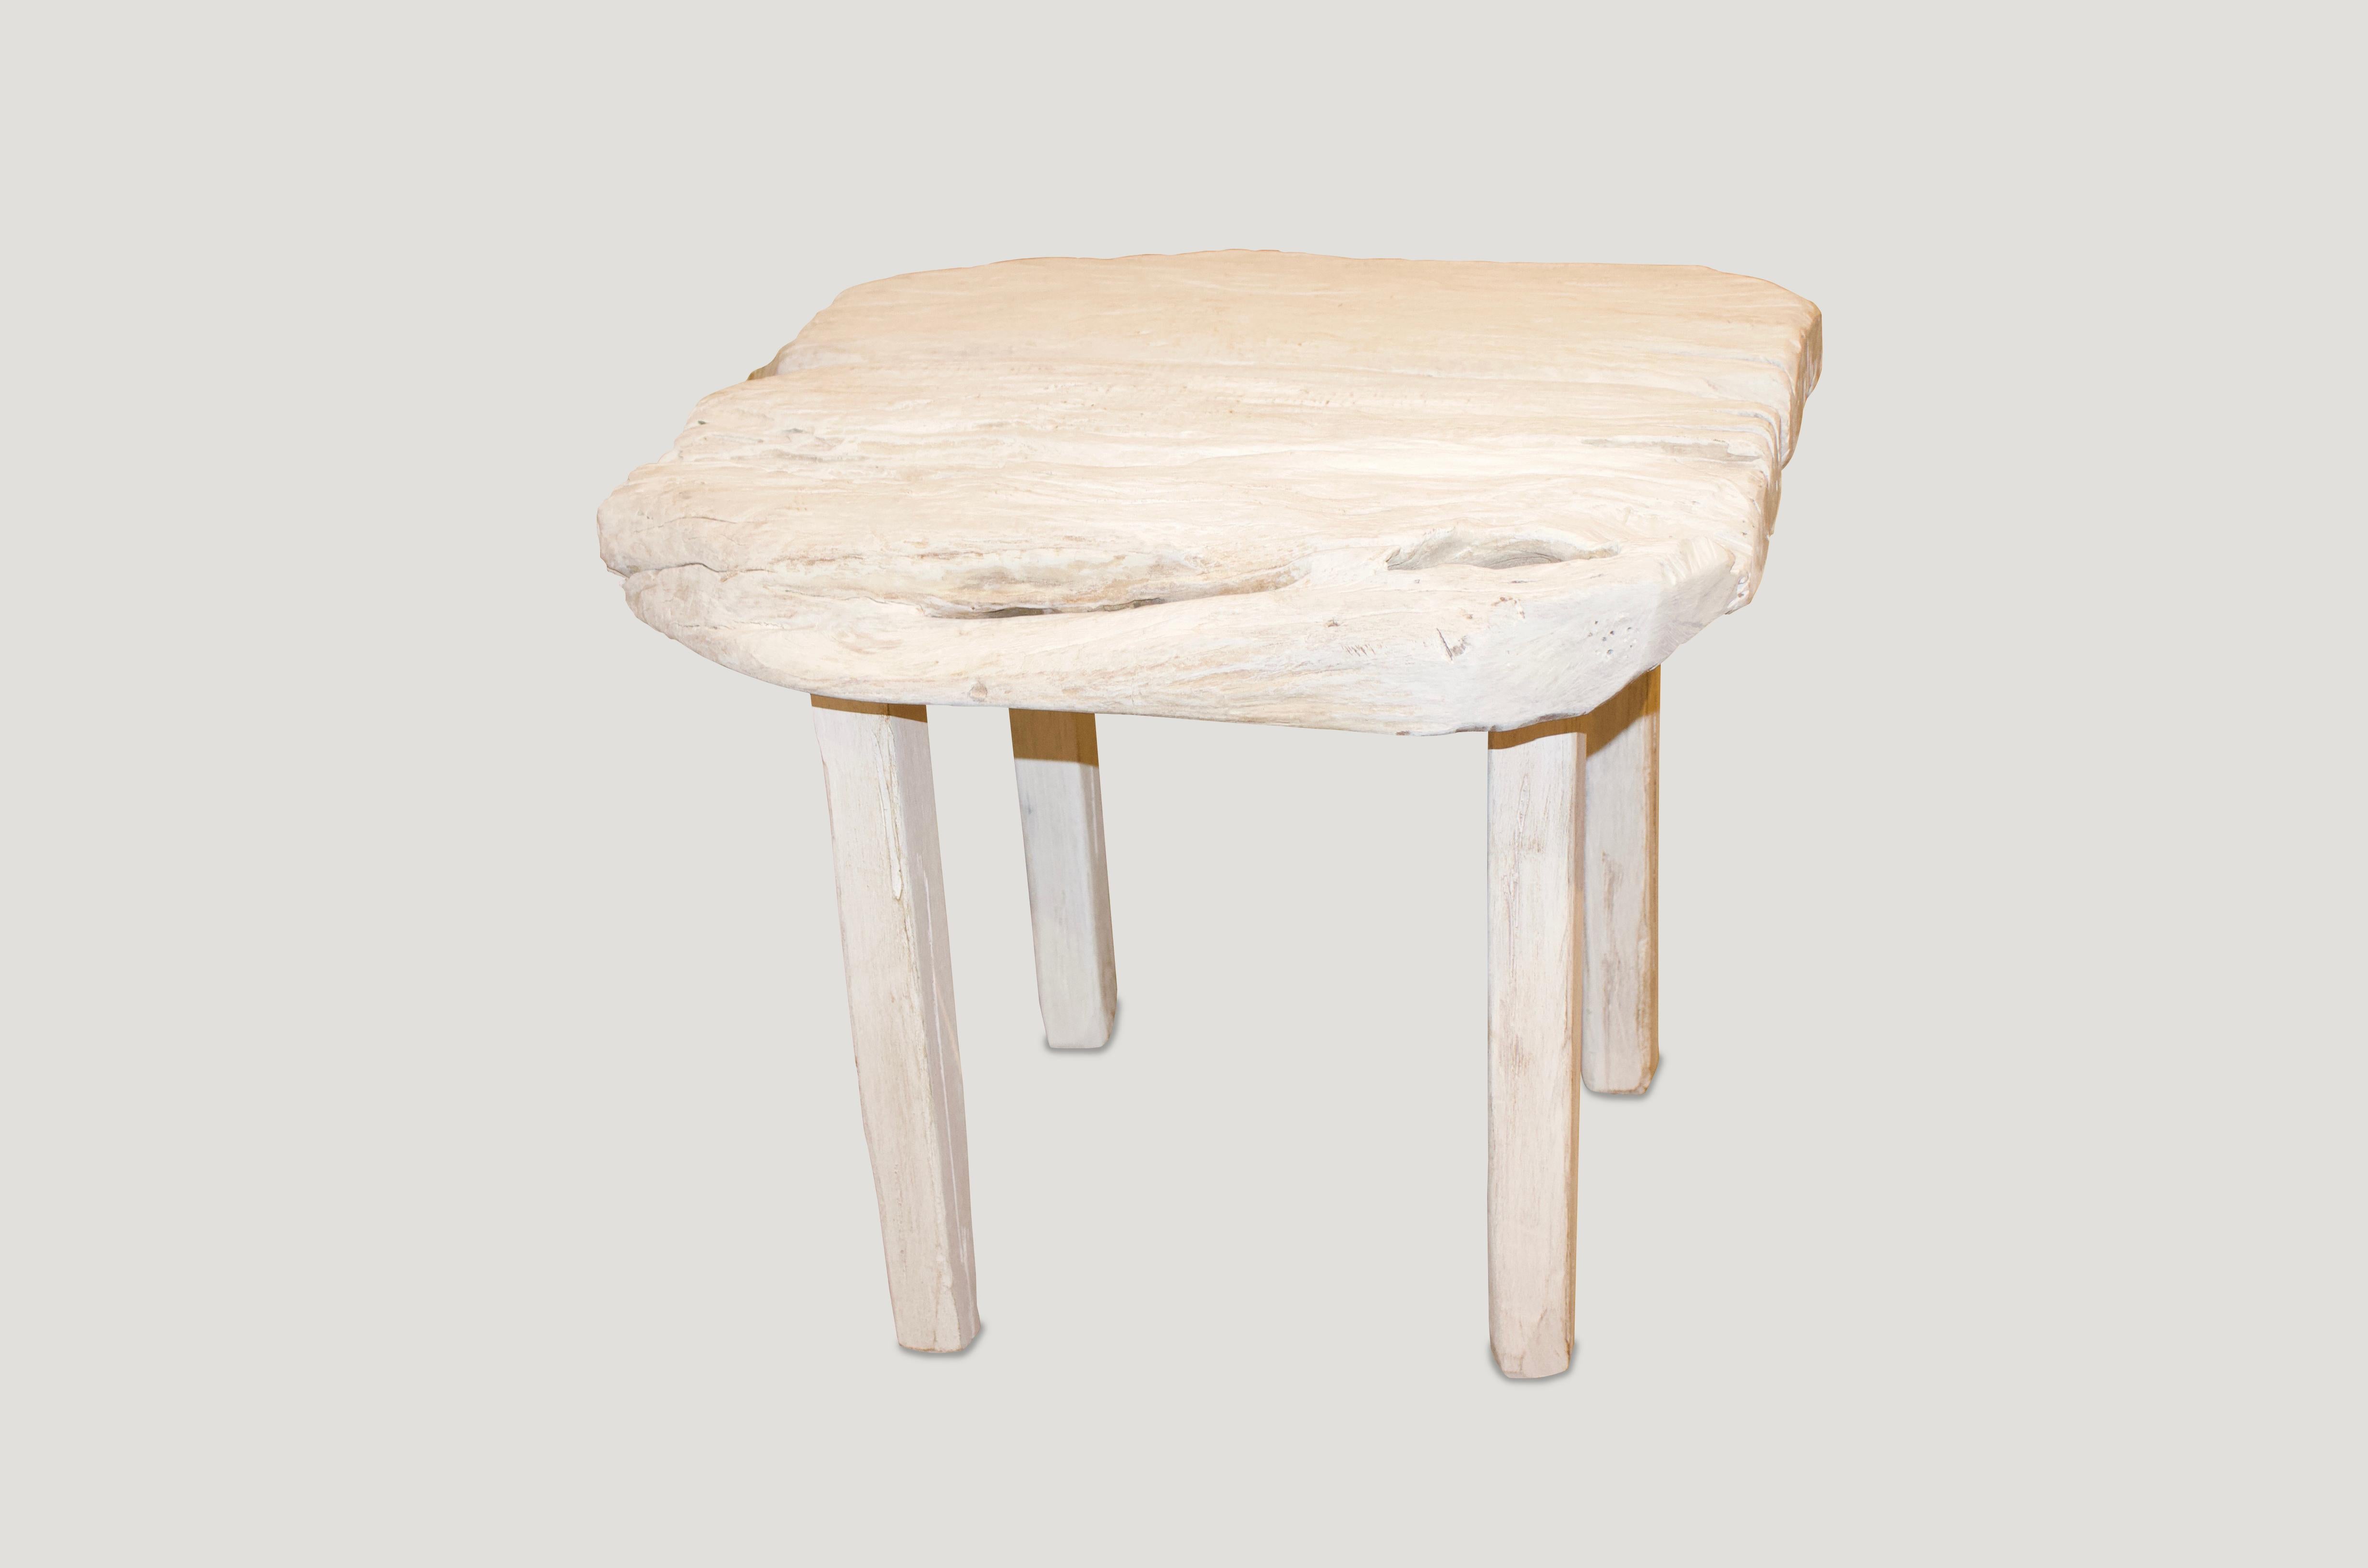 Reclaimed bleached teak side table. Pair available. The price reflects one. Perfect for inside or outside living.

The St. Barts collection features an exciting new line of organic white wash and natural weathered bleached teak furniture. The